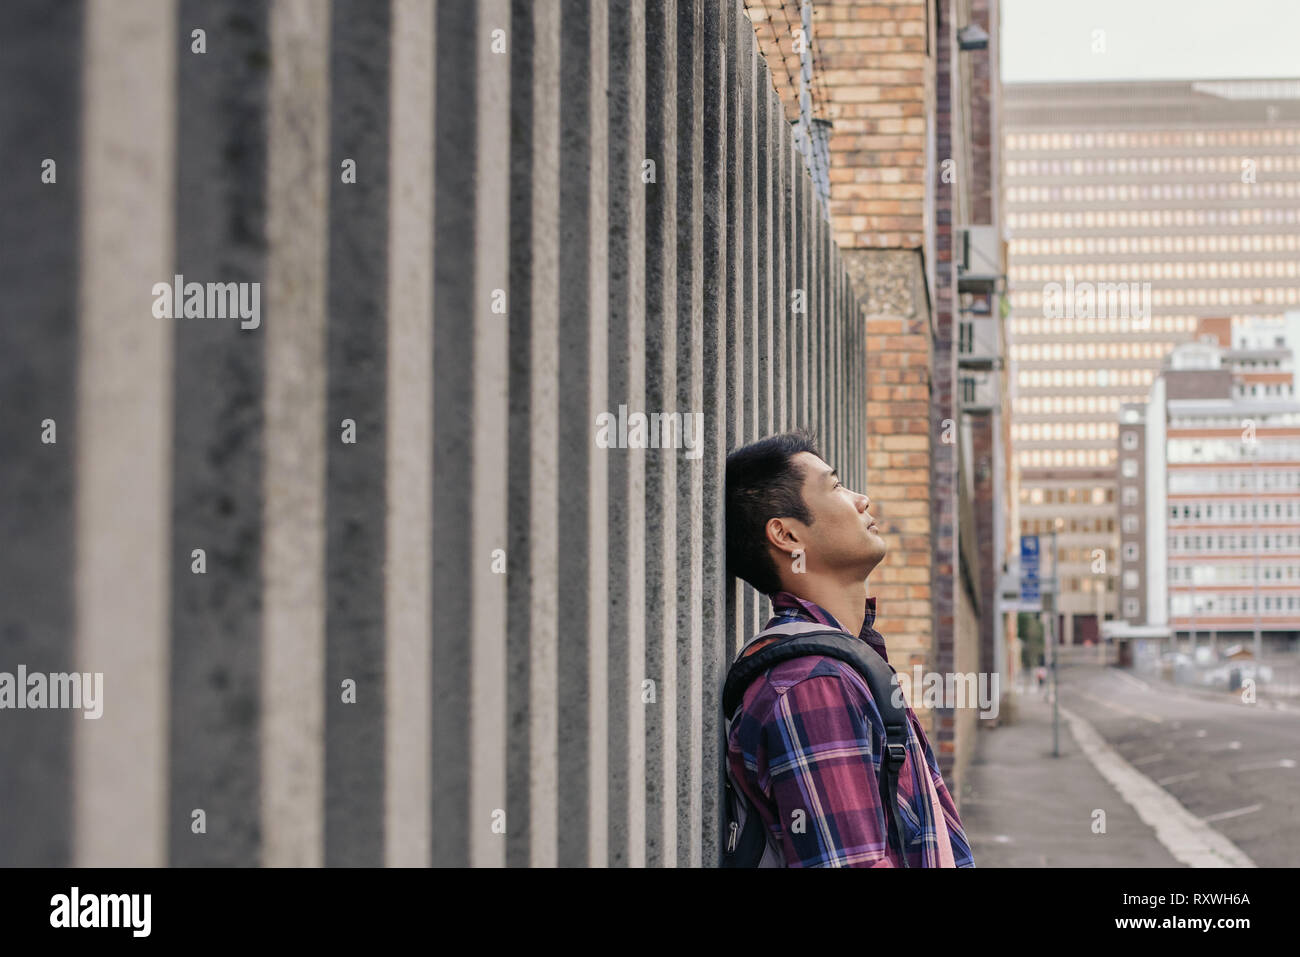 Content young Asian man leaning against a wall Stock Photo